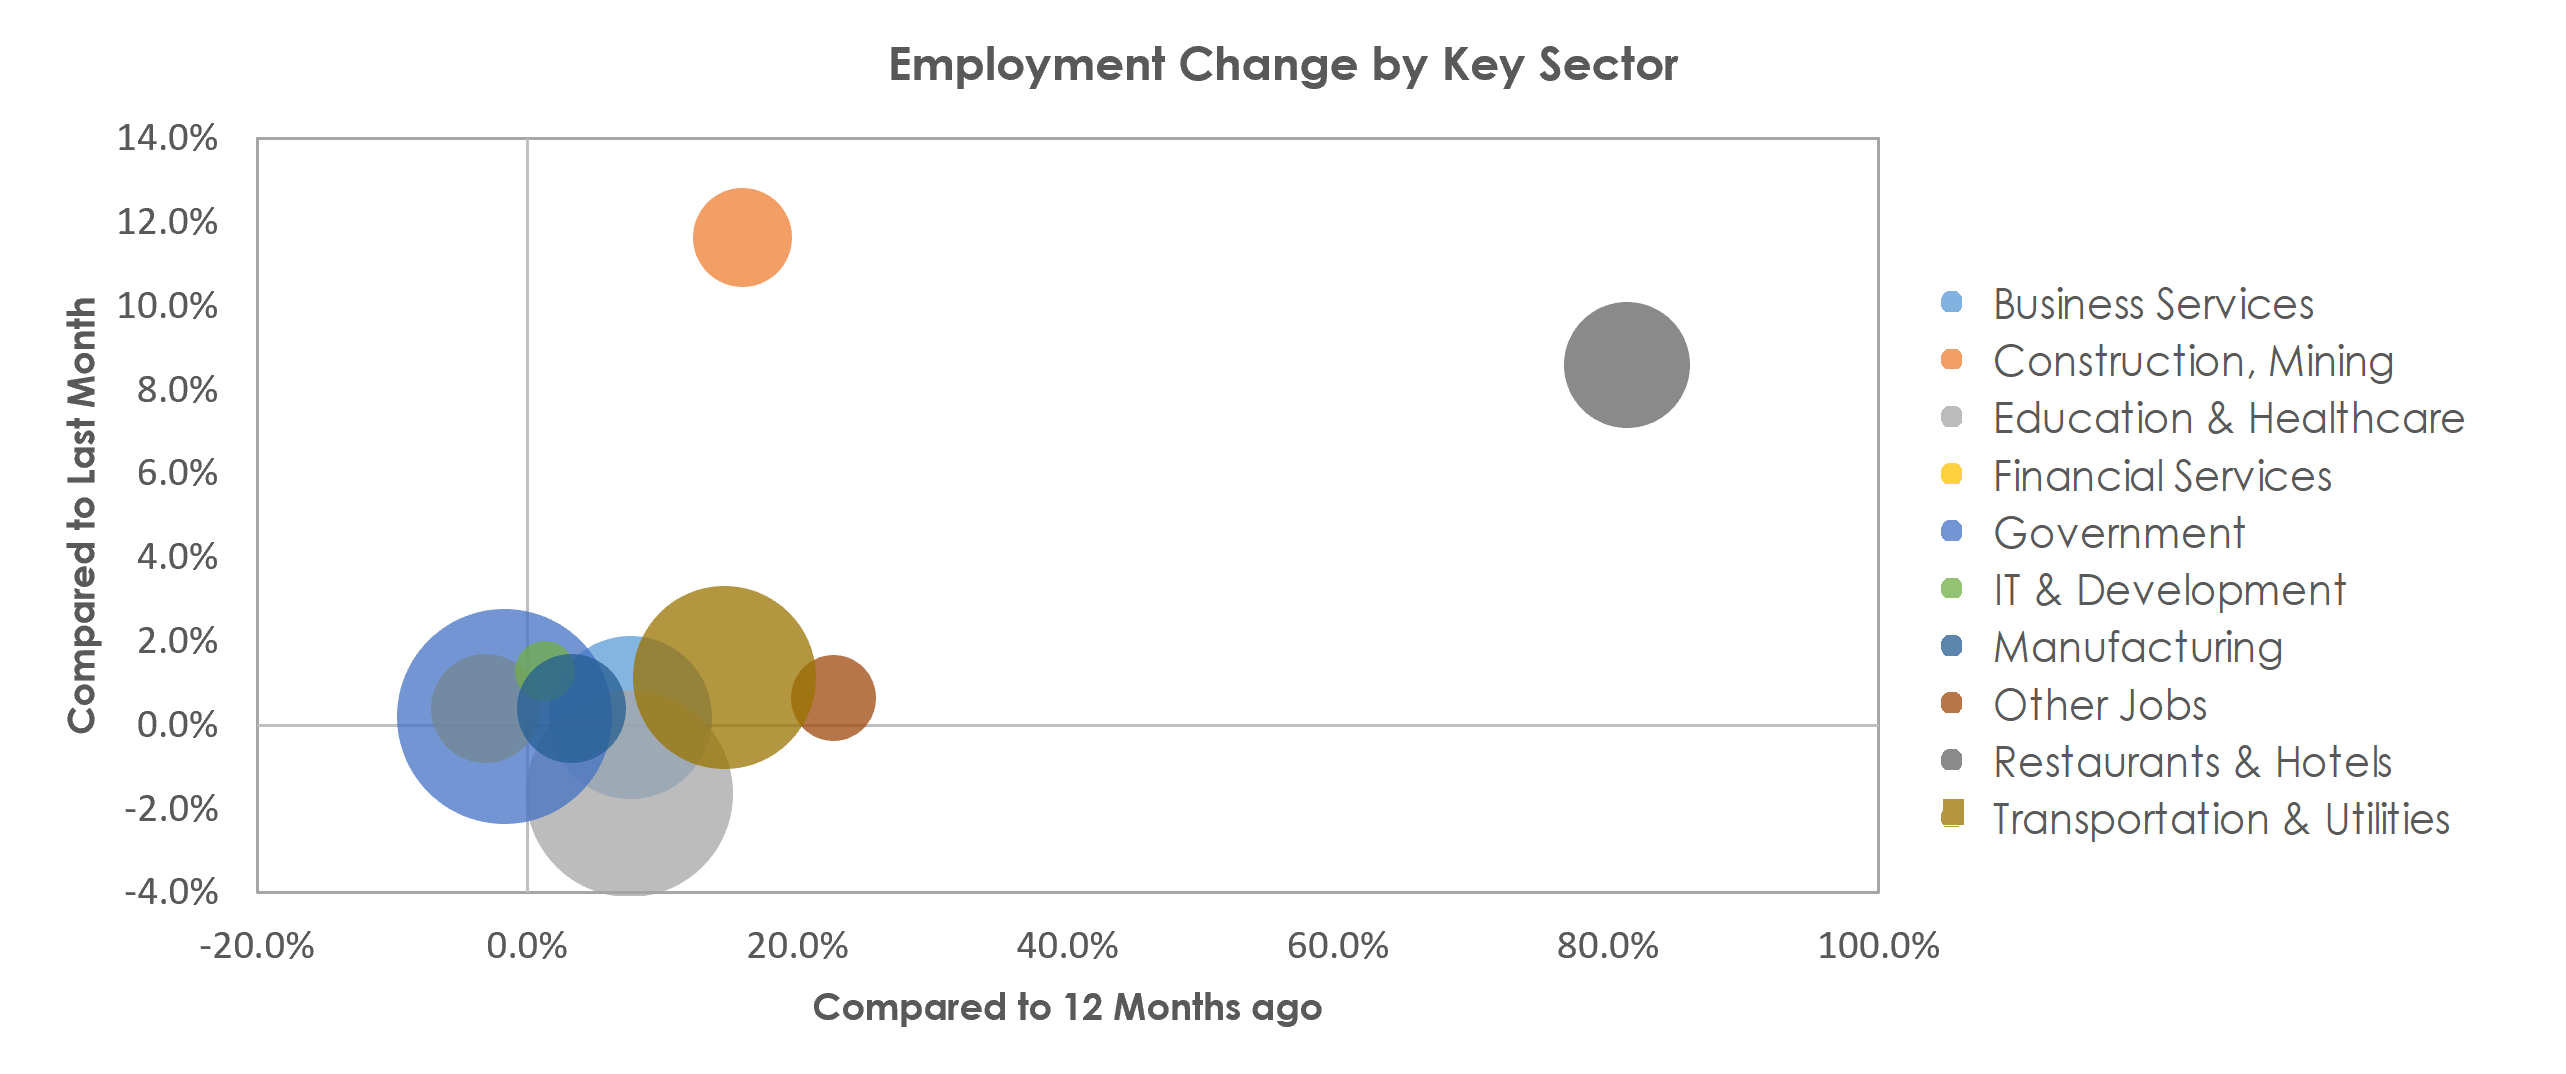 Albany-Schenectady-Troy, NY Unemployment by Industry May 2021